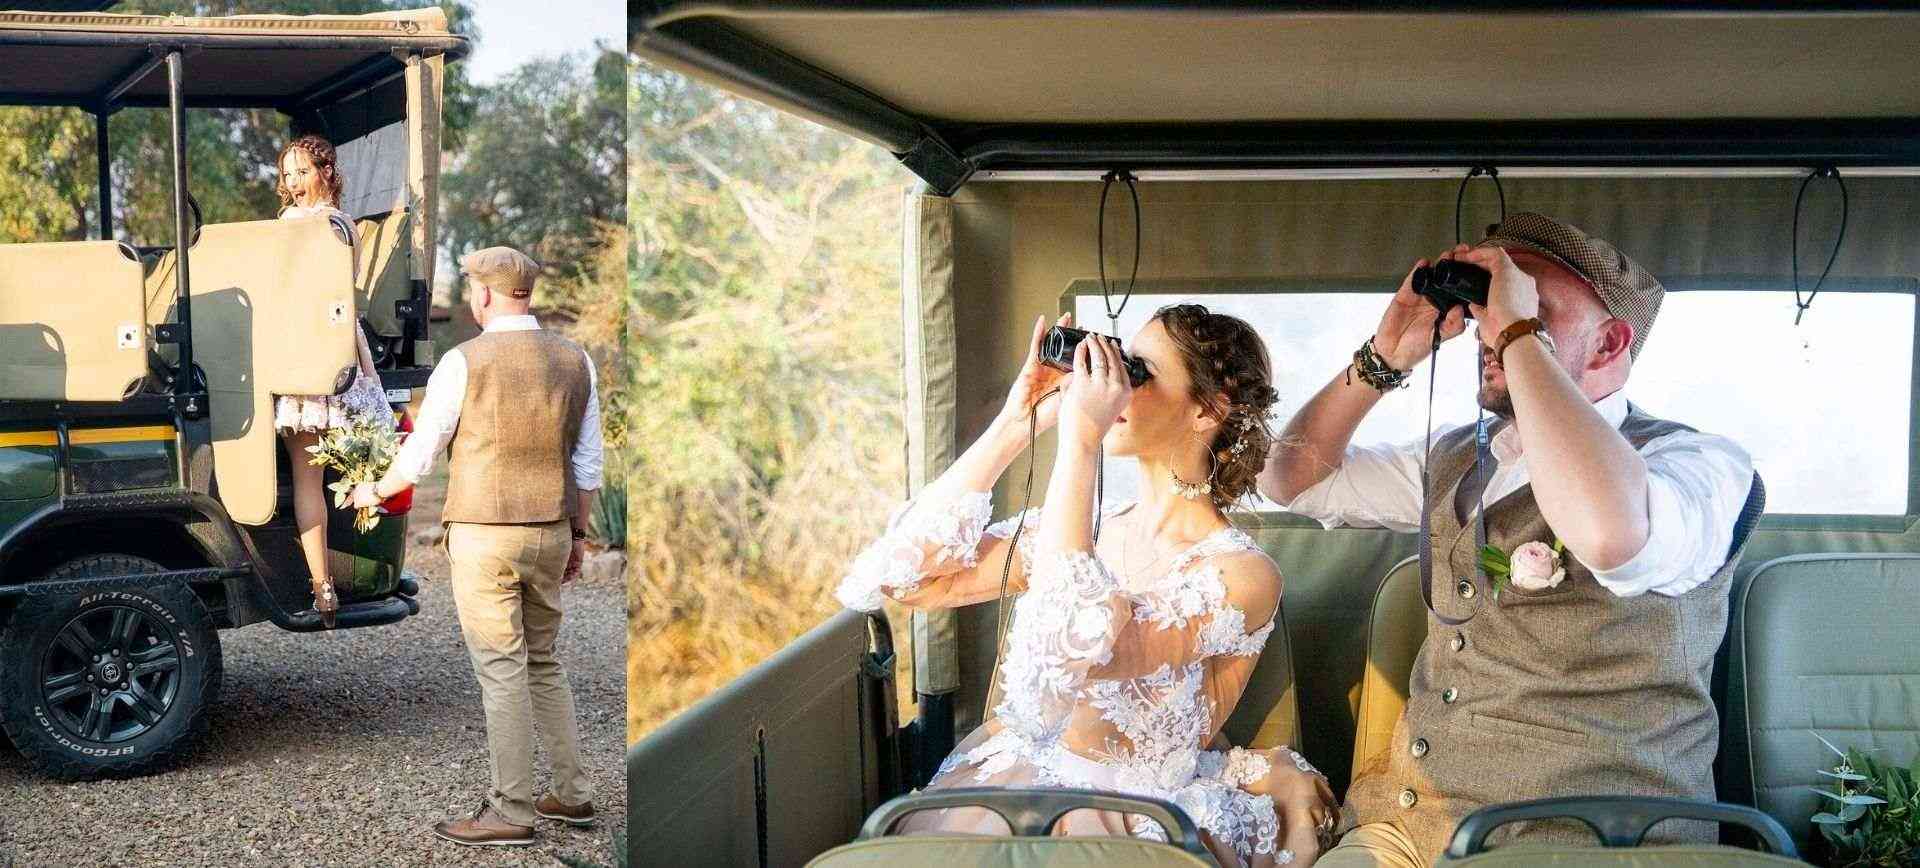 all-inclusive-elopement package and safari honeymoon in south africa